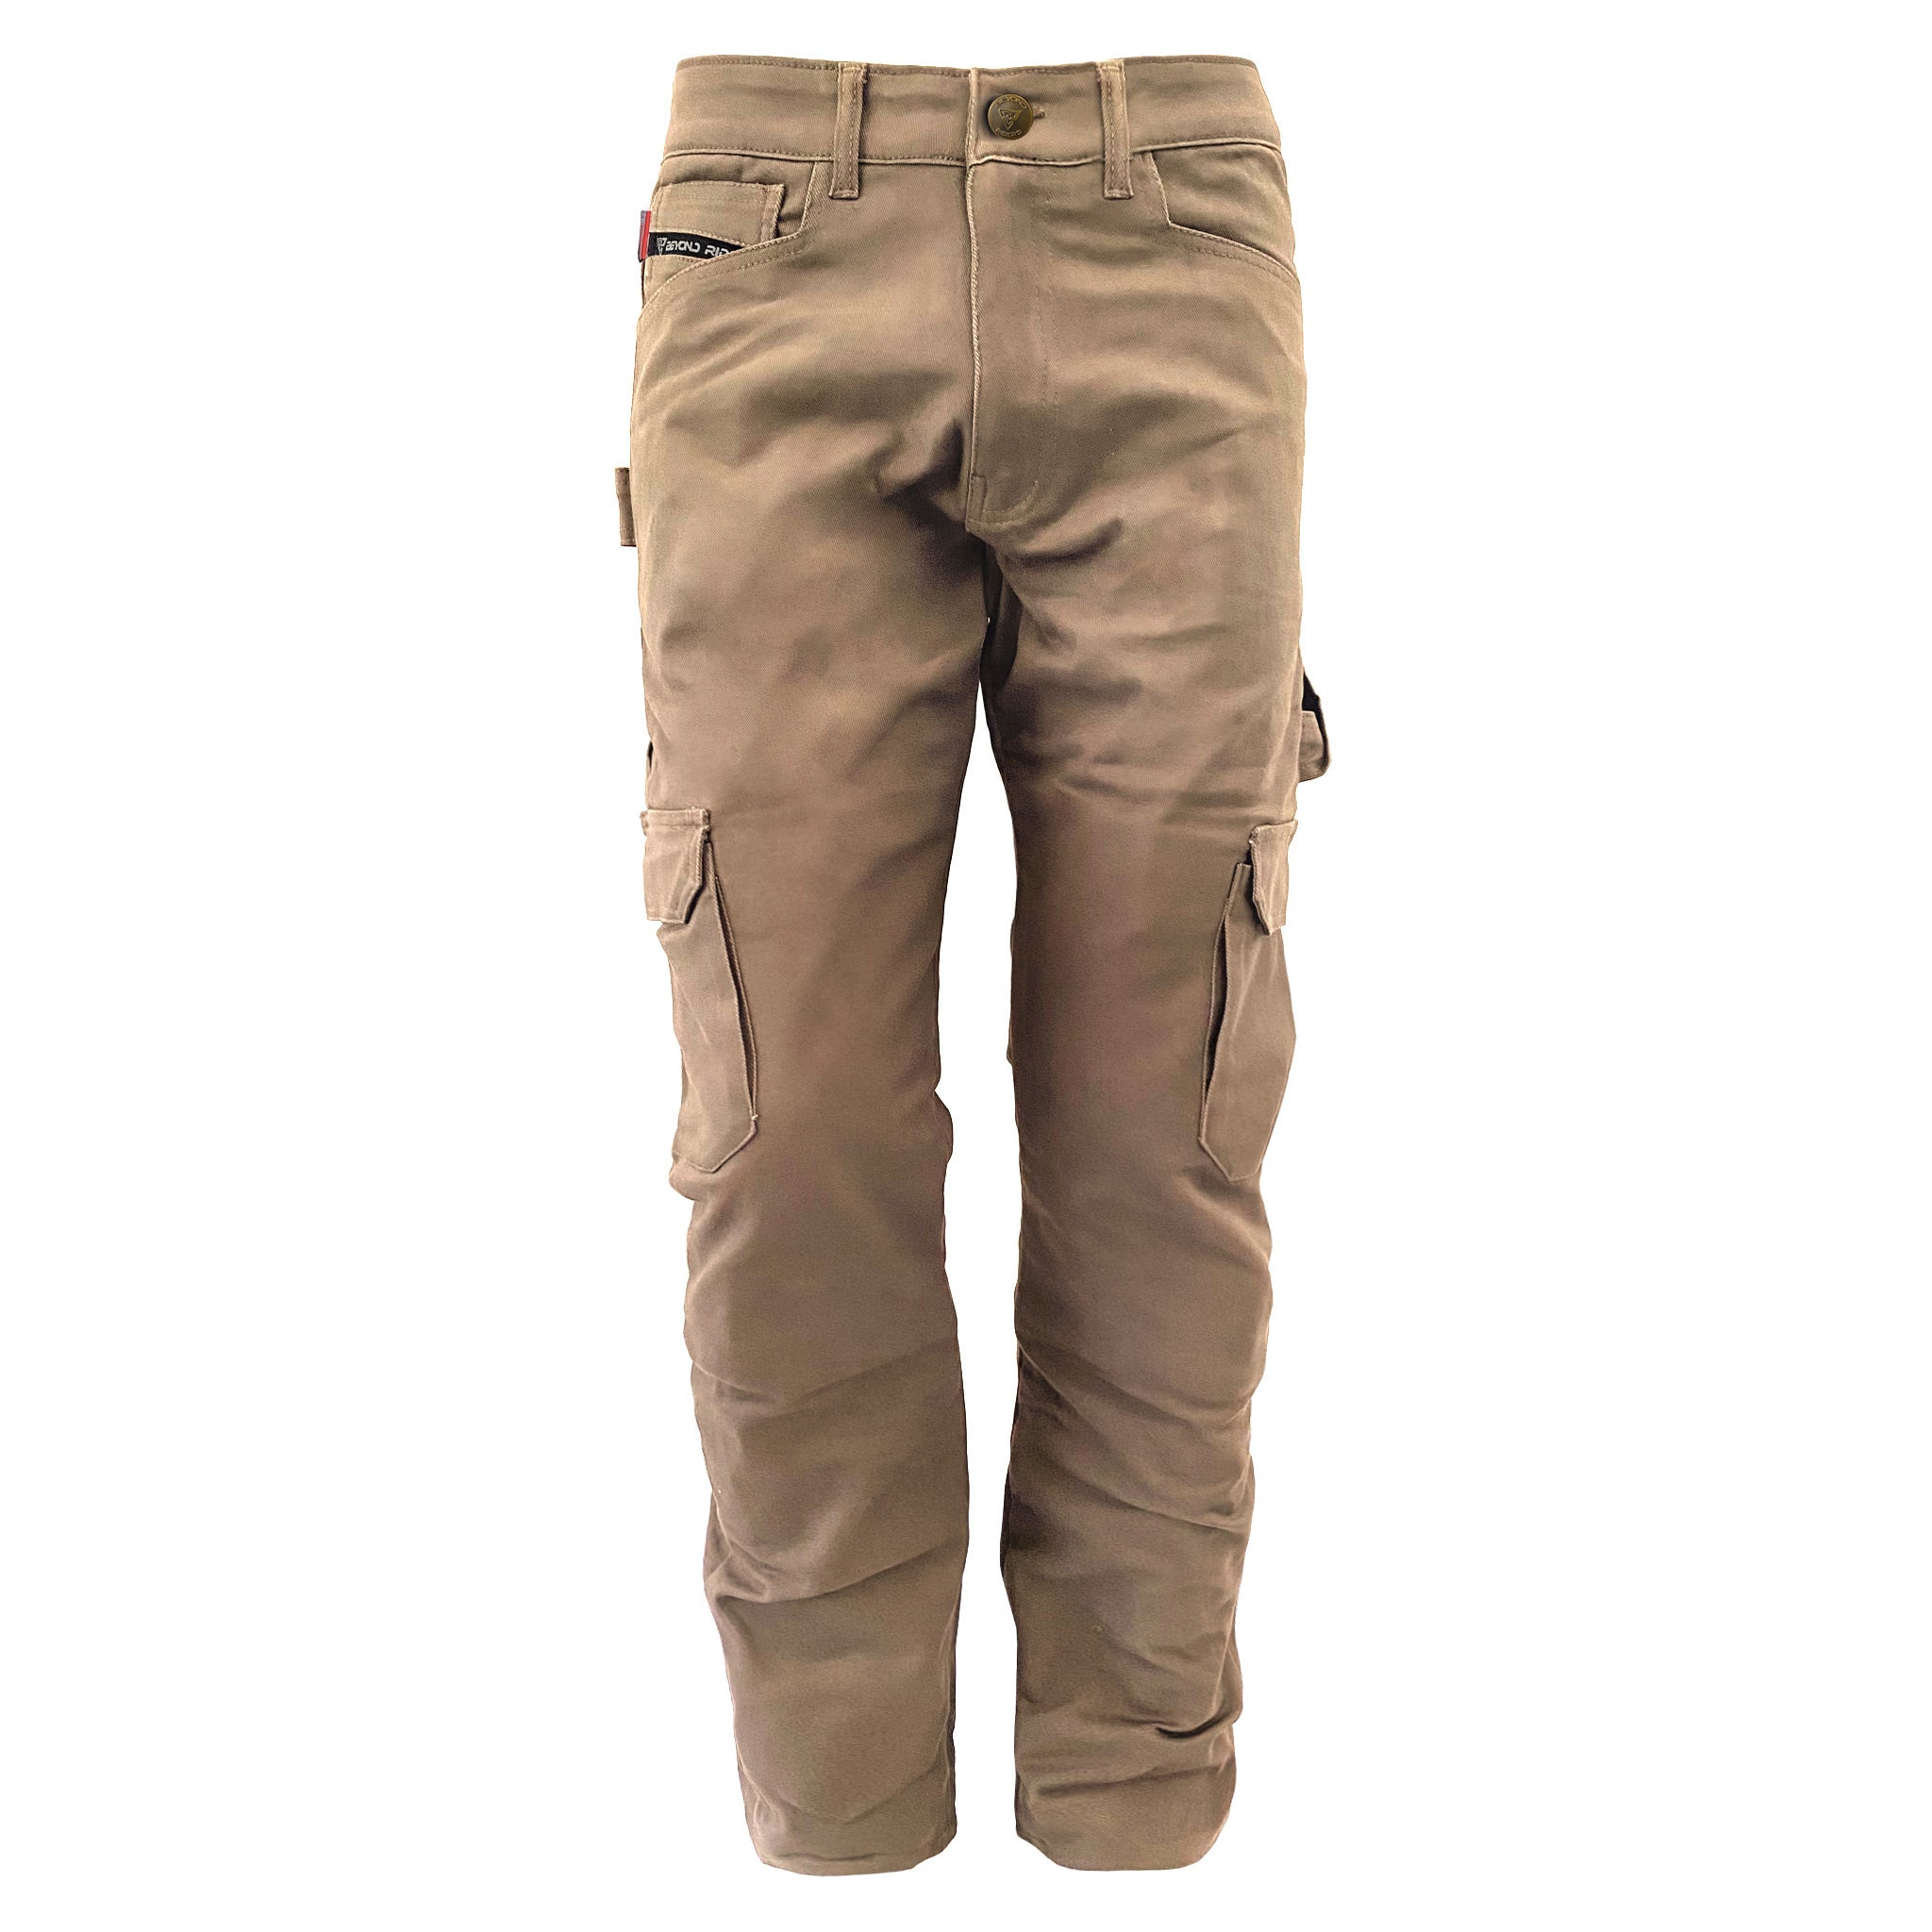 Loose Fit Cargo Pants - Khaki Solid with Pads